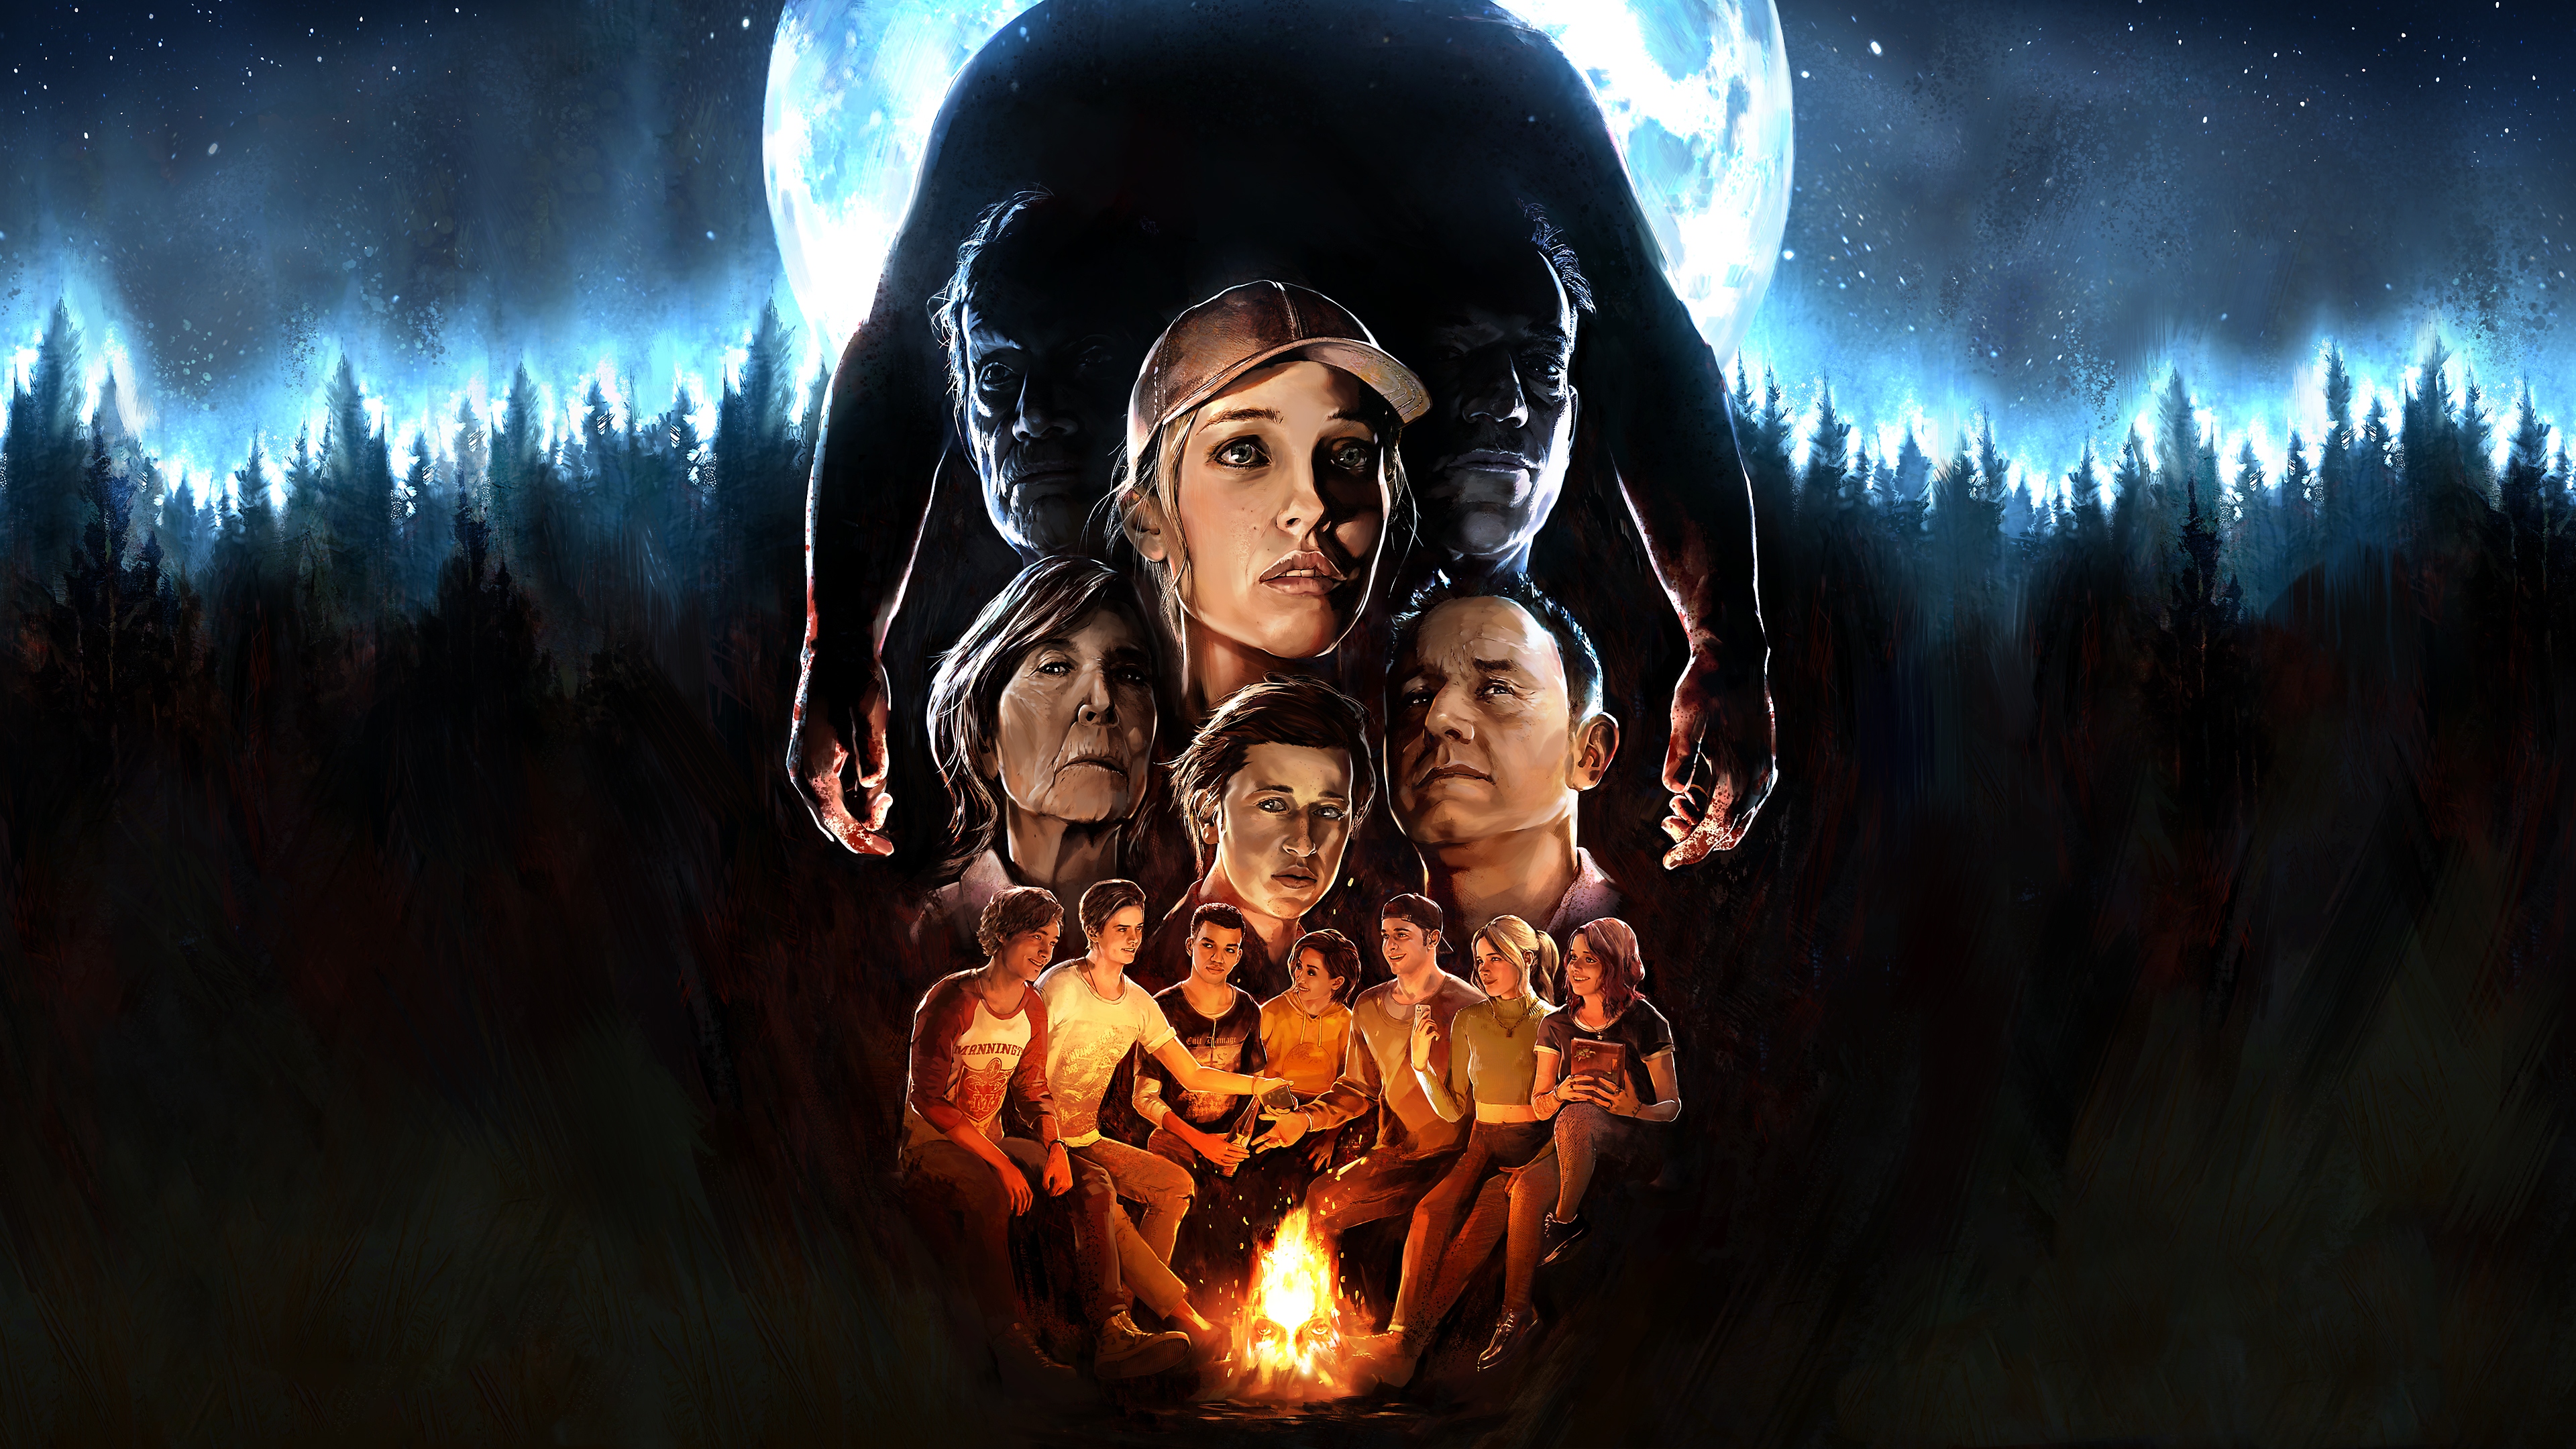 The Quarry key art featuring a handpainted rendition of the key cast against a dark woodland backdrop.